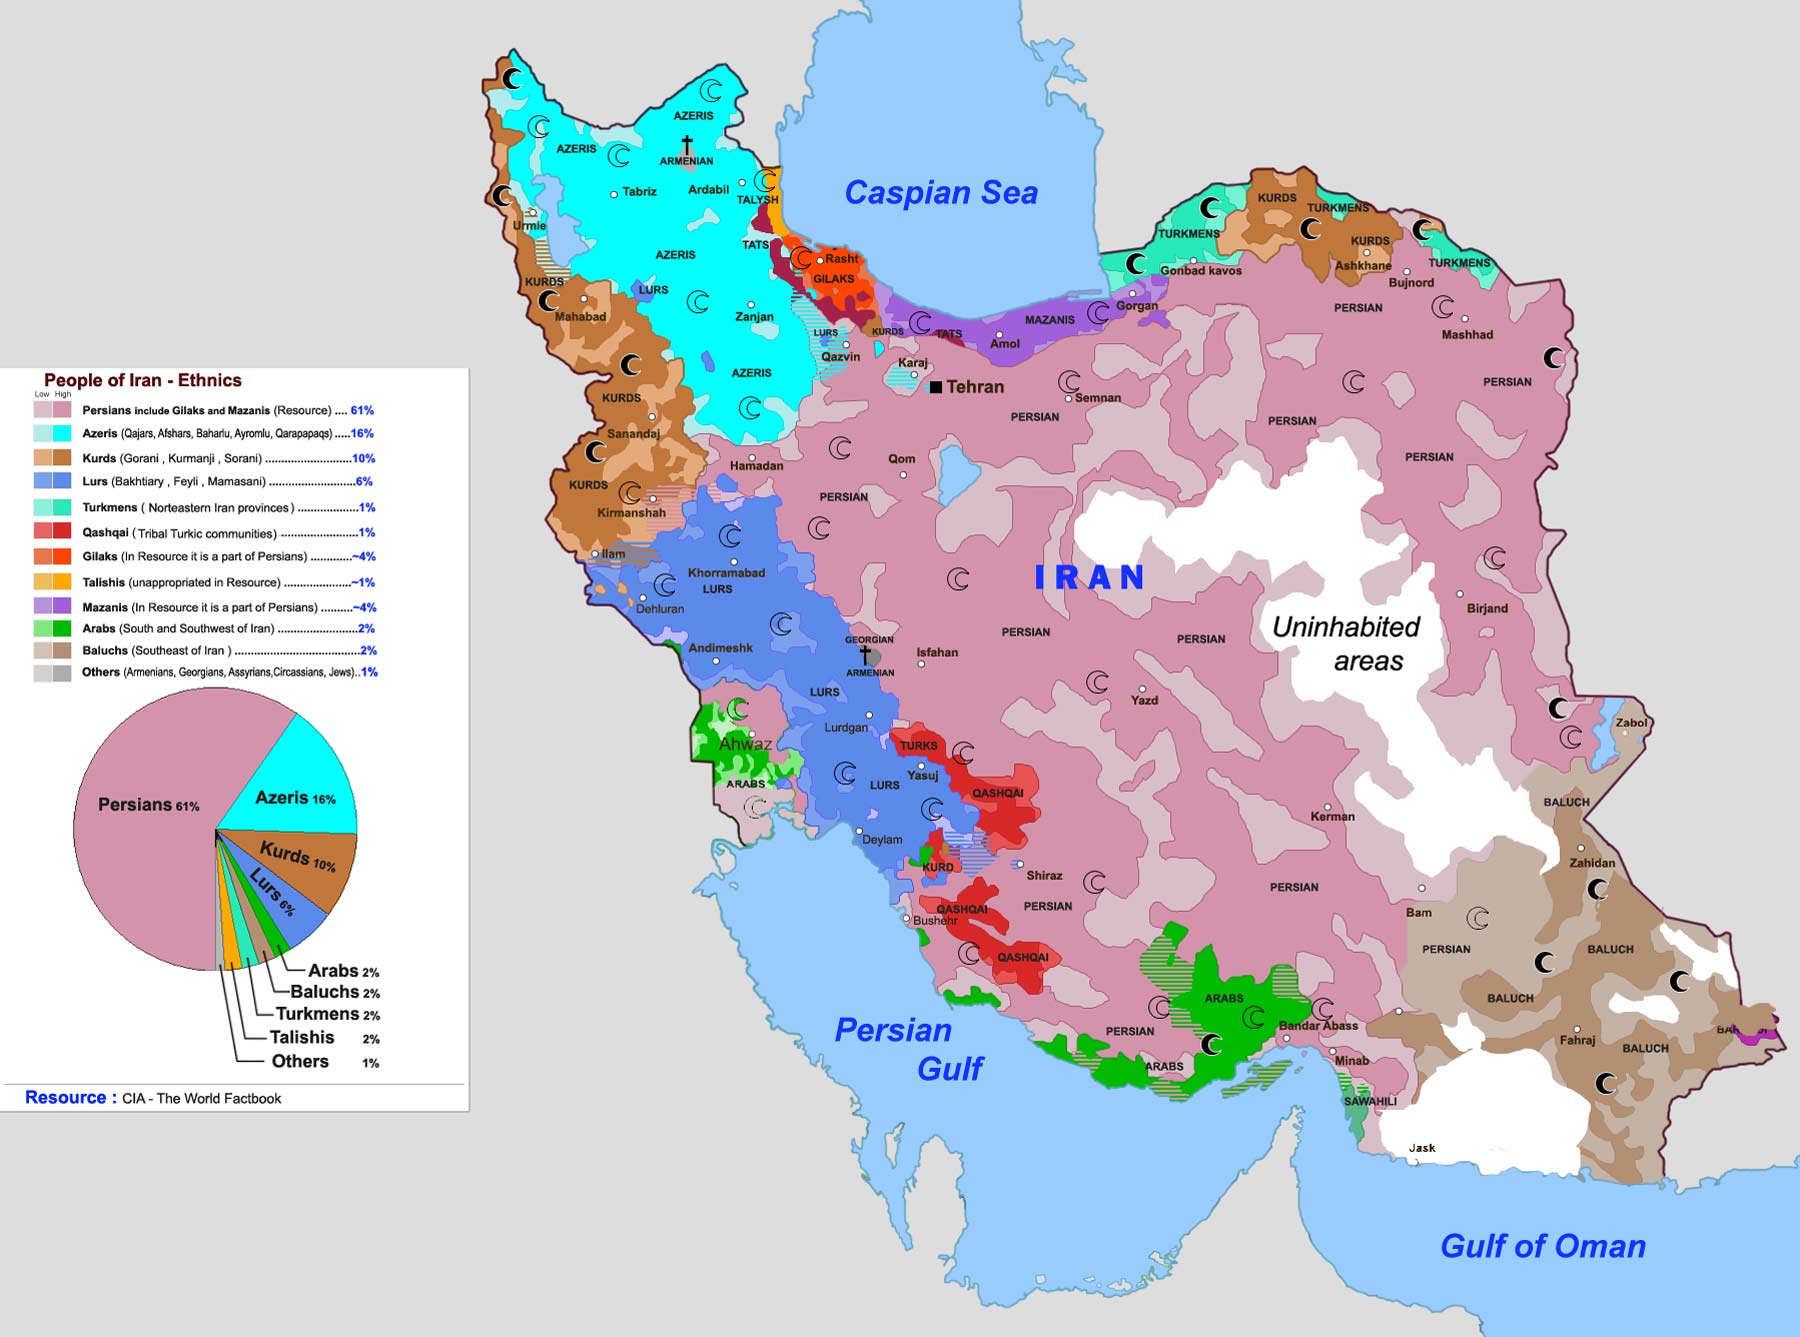 The ethnicities and people distribution map of Iran